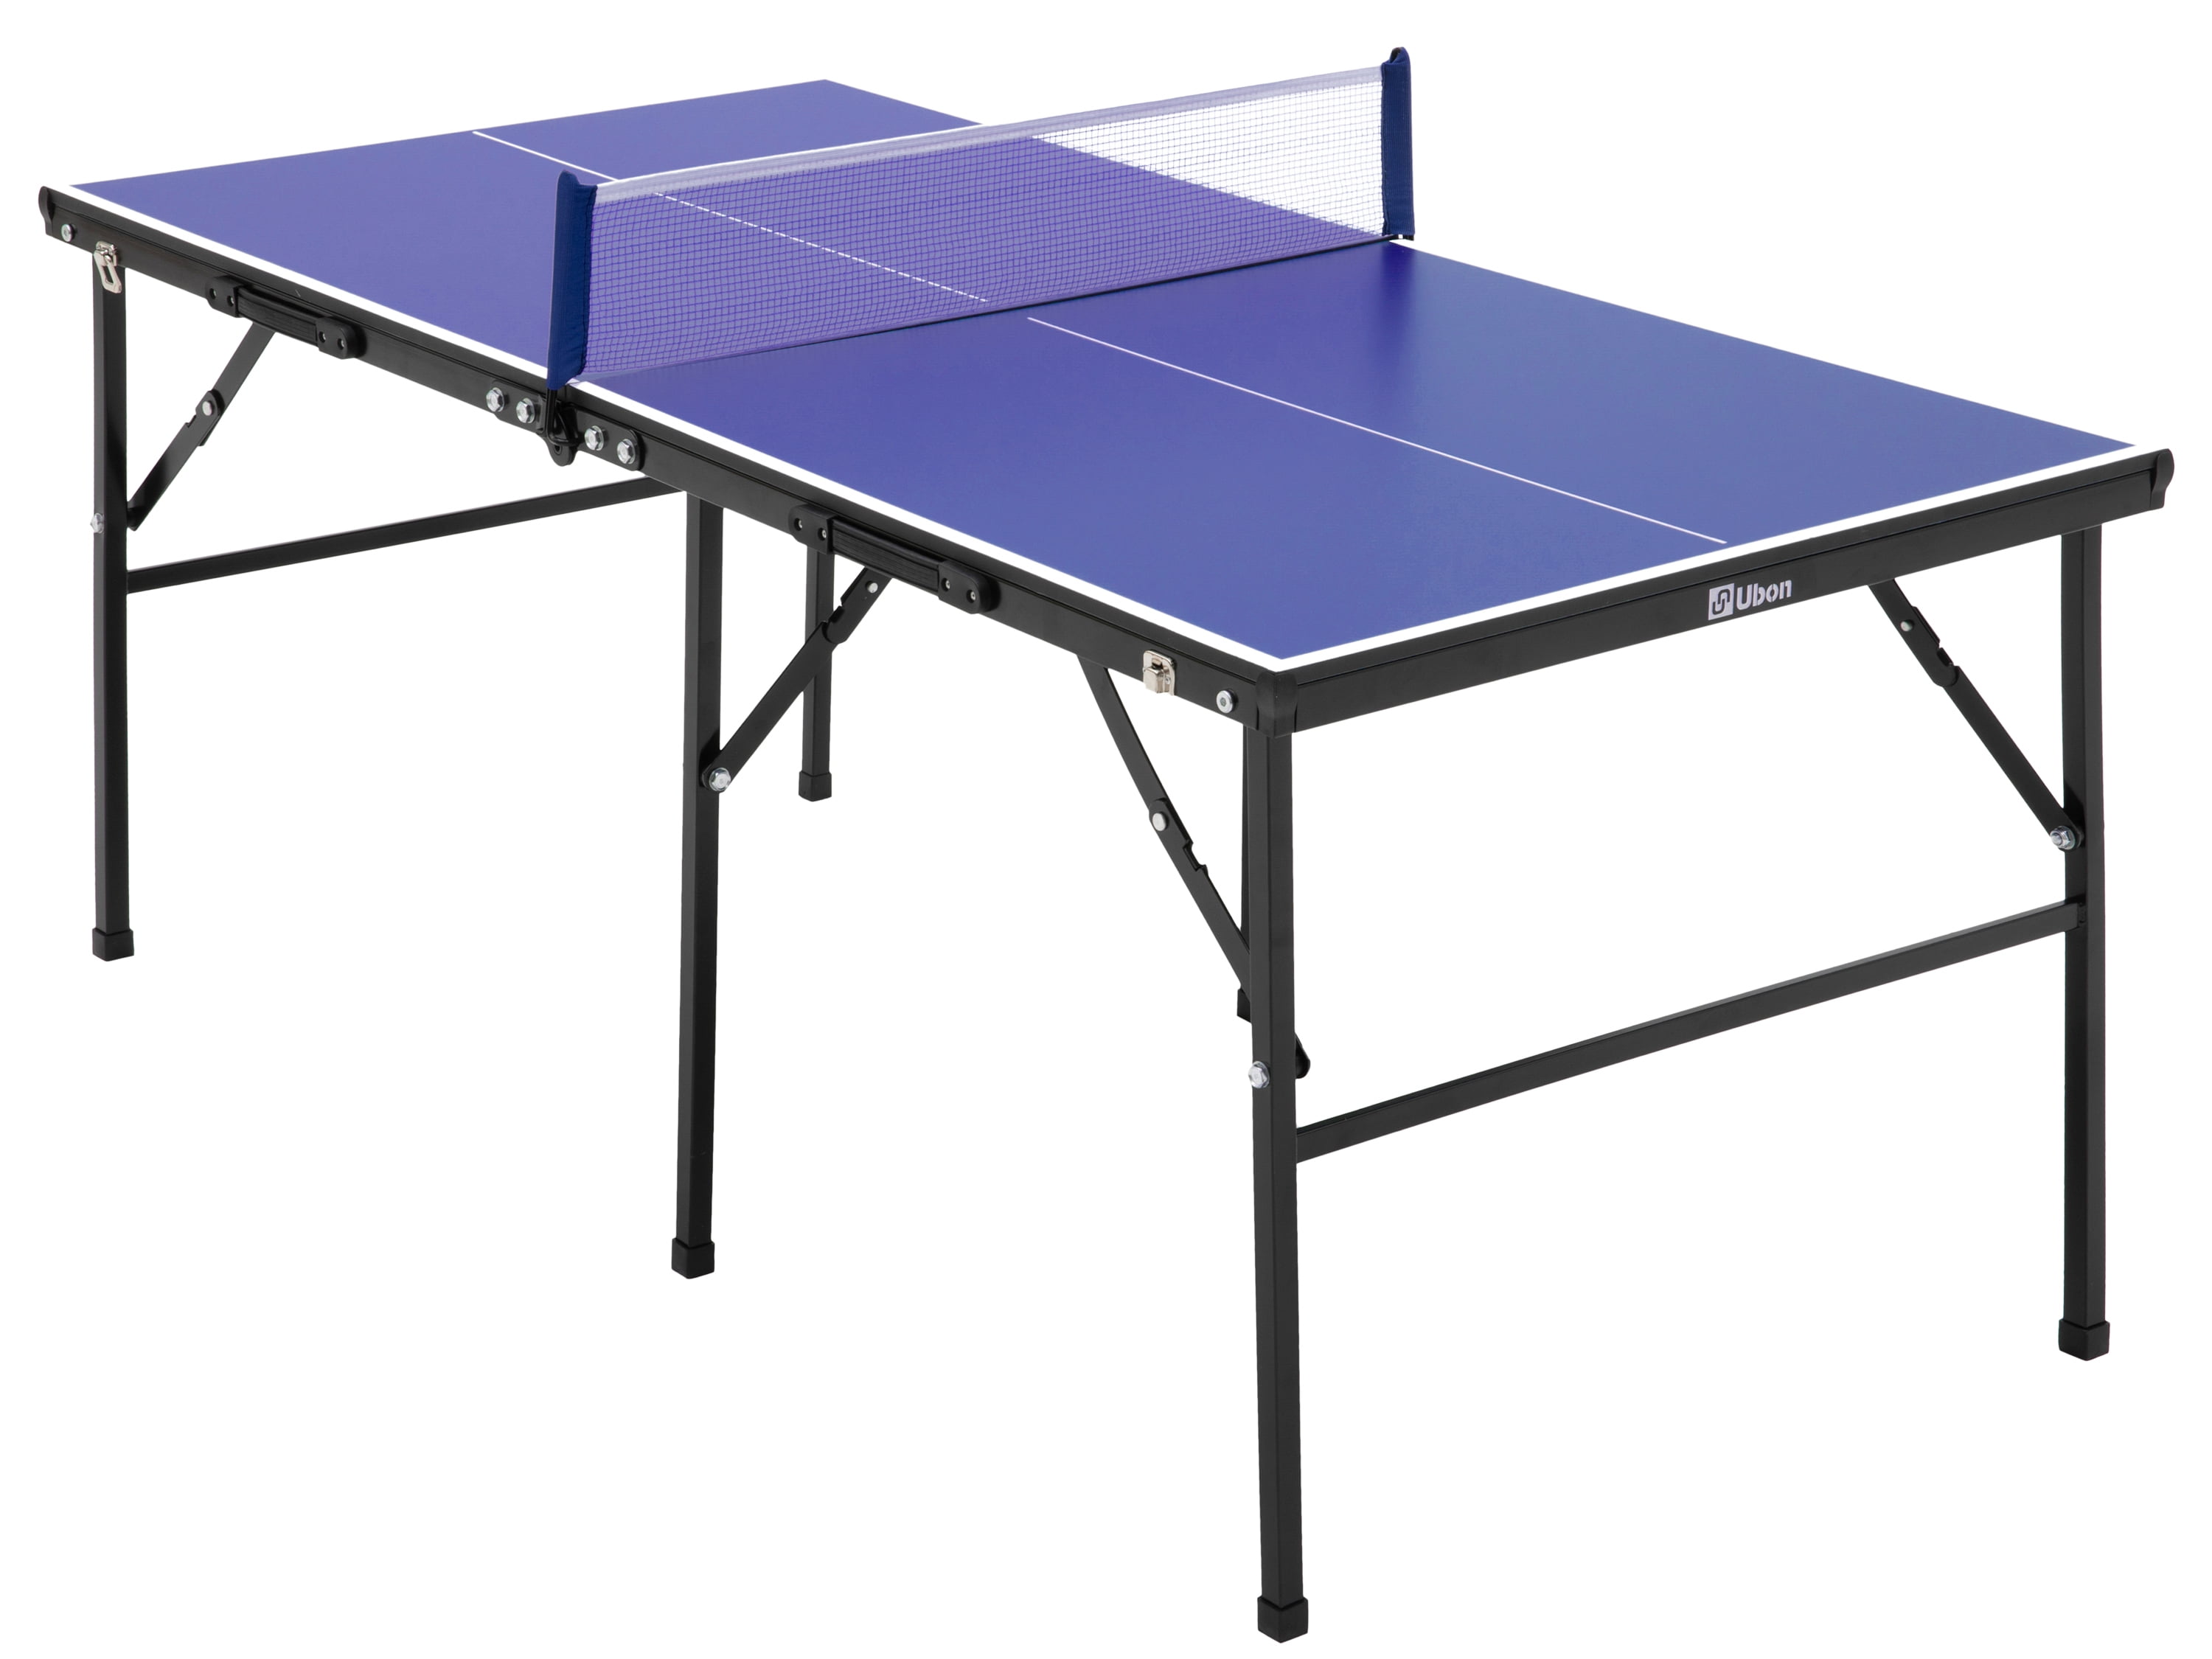 Green Walker & Simpson Smash Full Size 4 Piece Table Tennis Table 